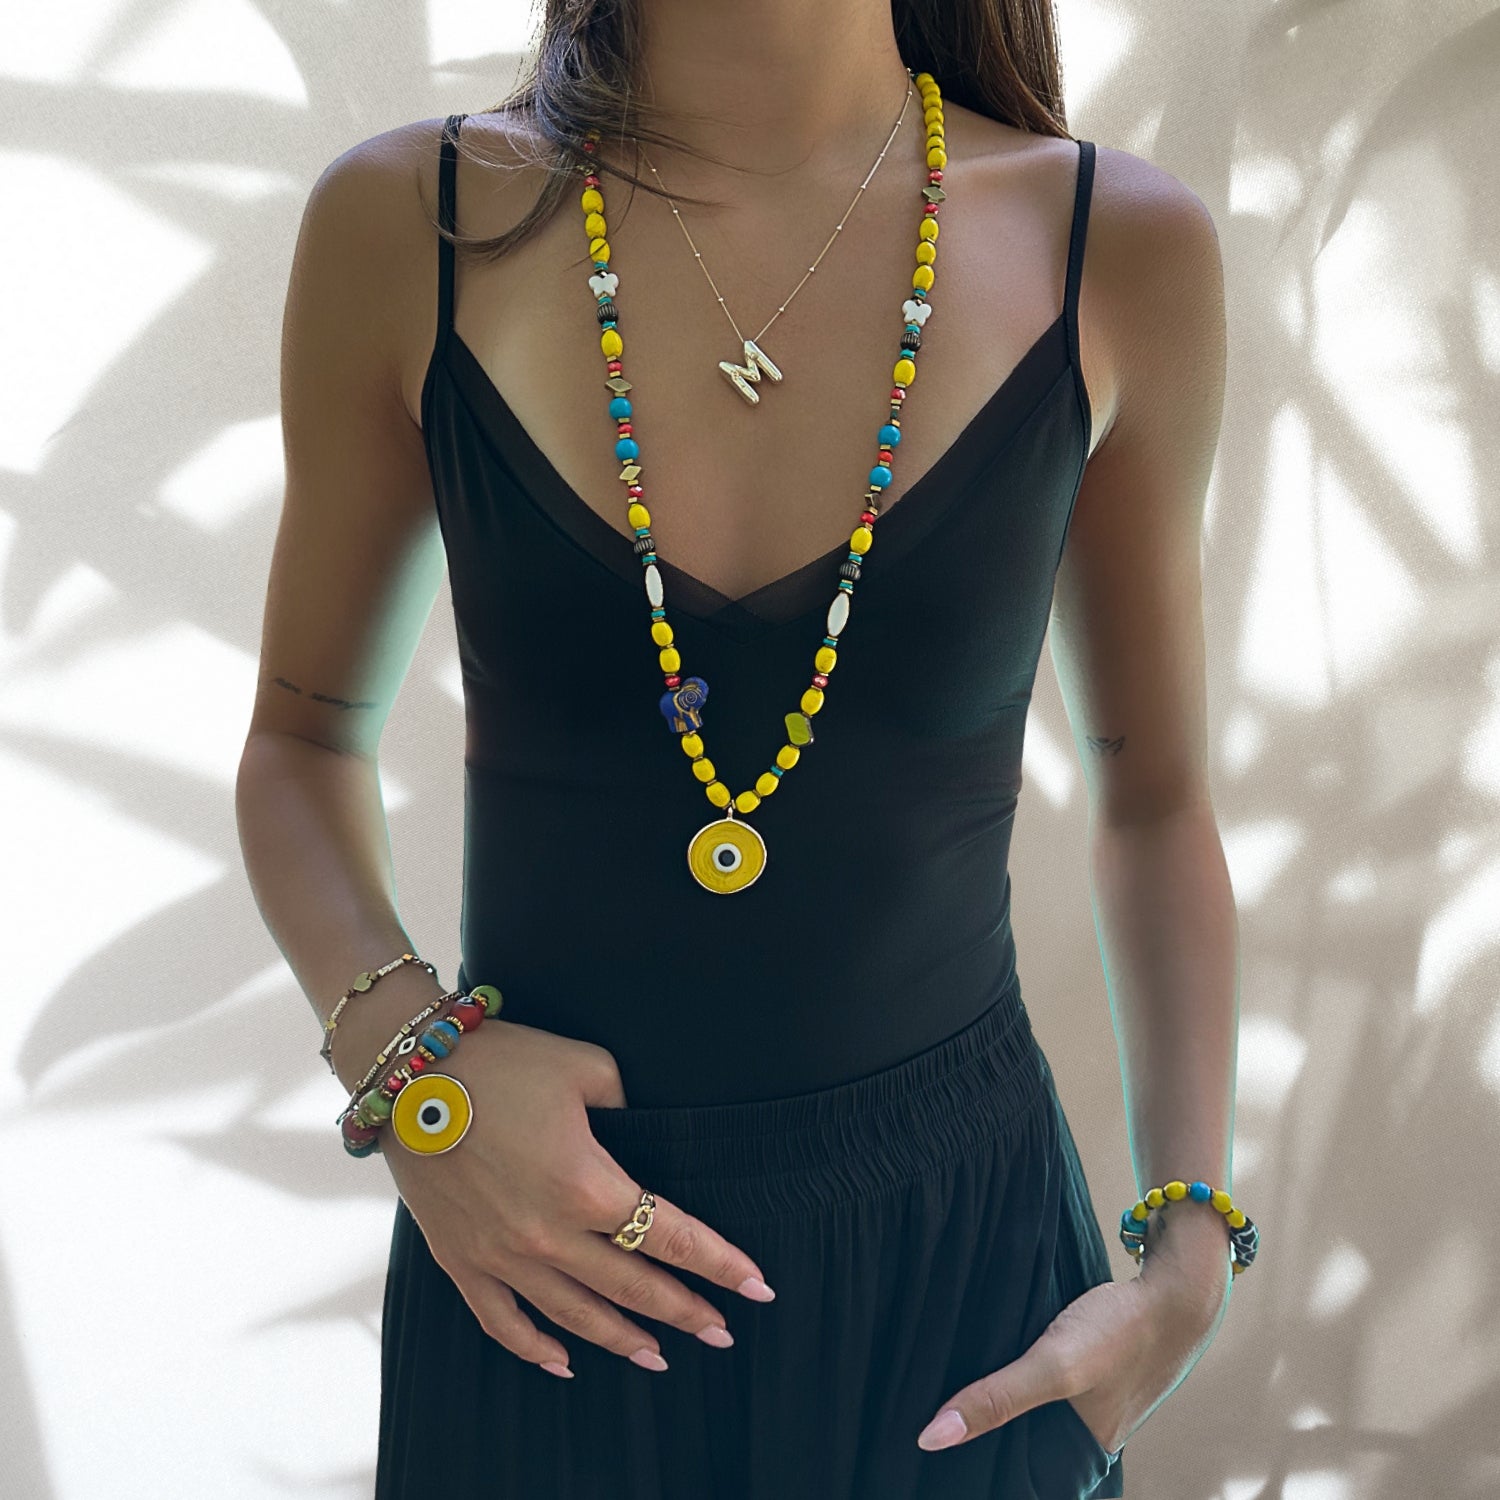 Model wearing the Carpe Diem Necklace, exuding confidence and embracing the moment.